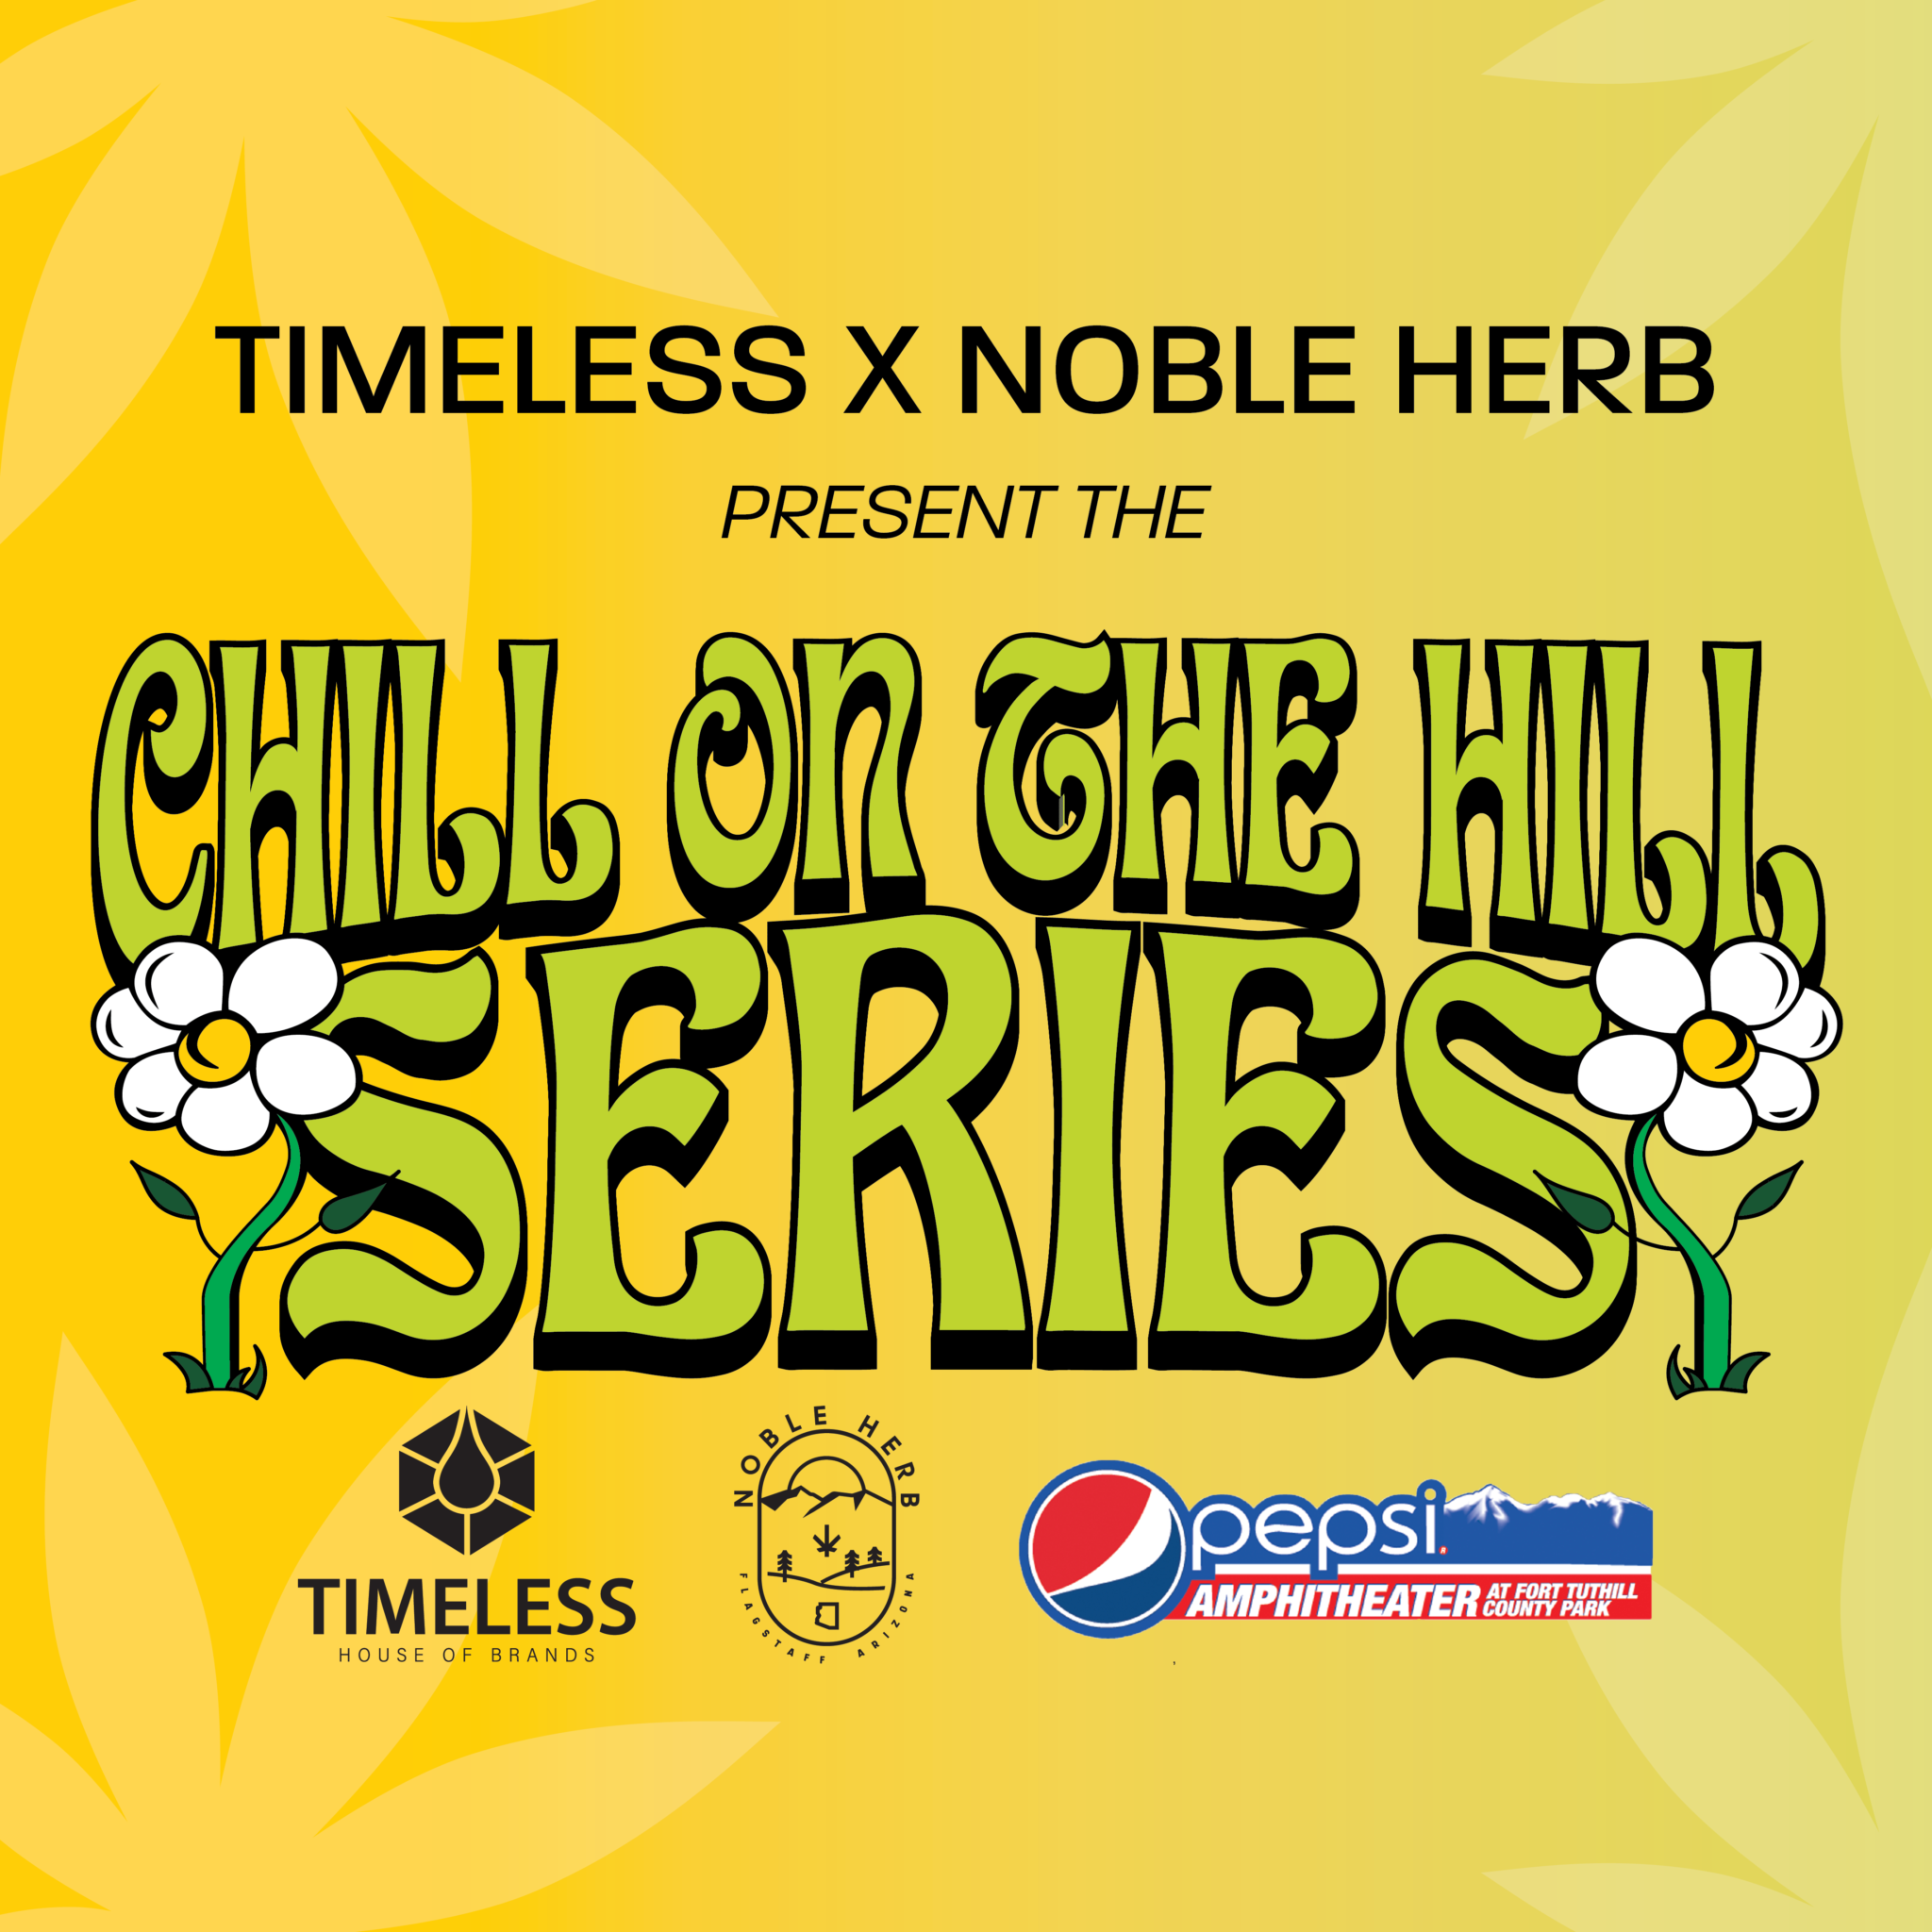 Chill on the Hill Concert Series Timeless Vapes